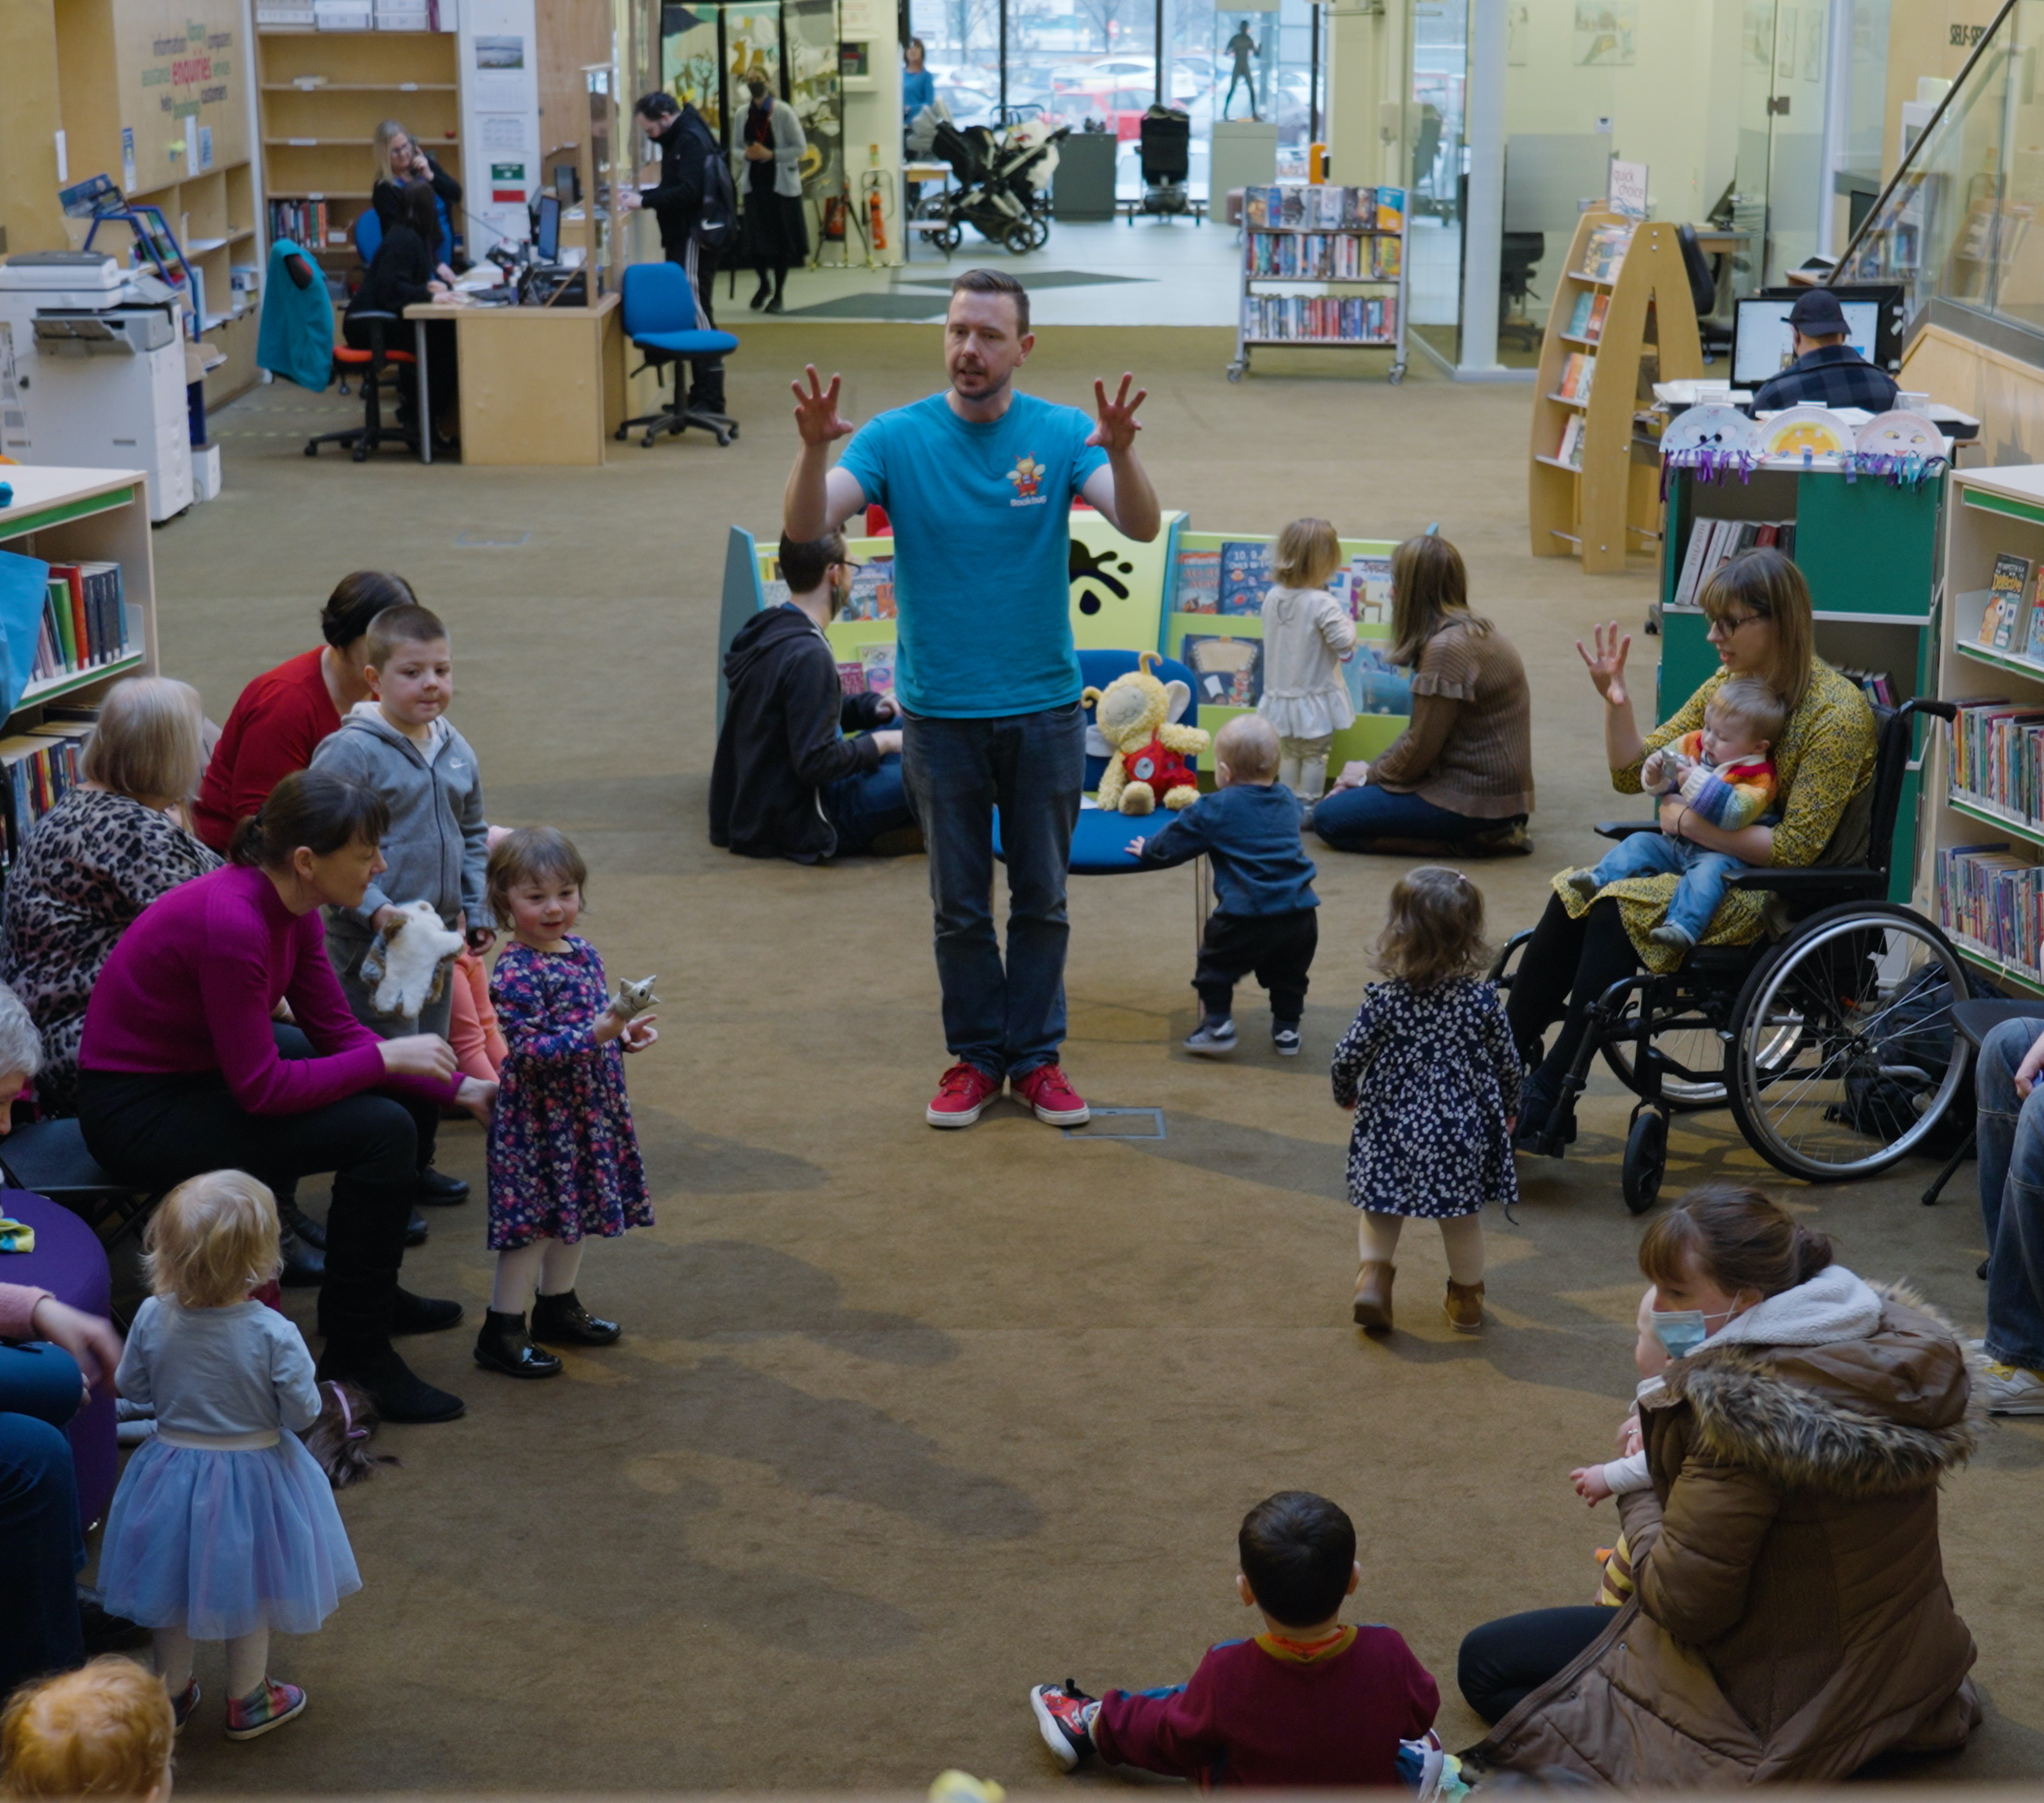 Photo of an adult running a Bookbug session in a library. A man in blue tshirt and jeans stands amongst a group of pre-school children, toddlers and their parents and carers. He is leading them in song.